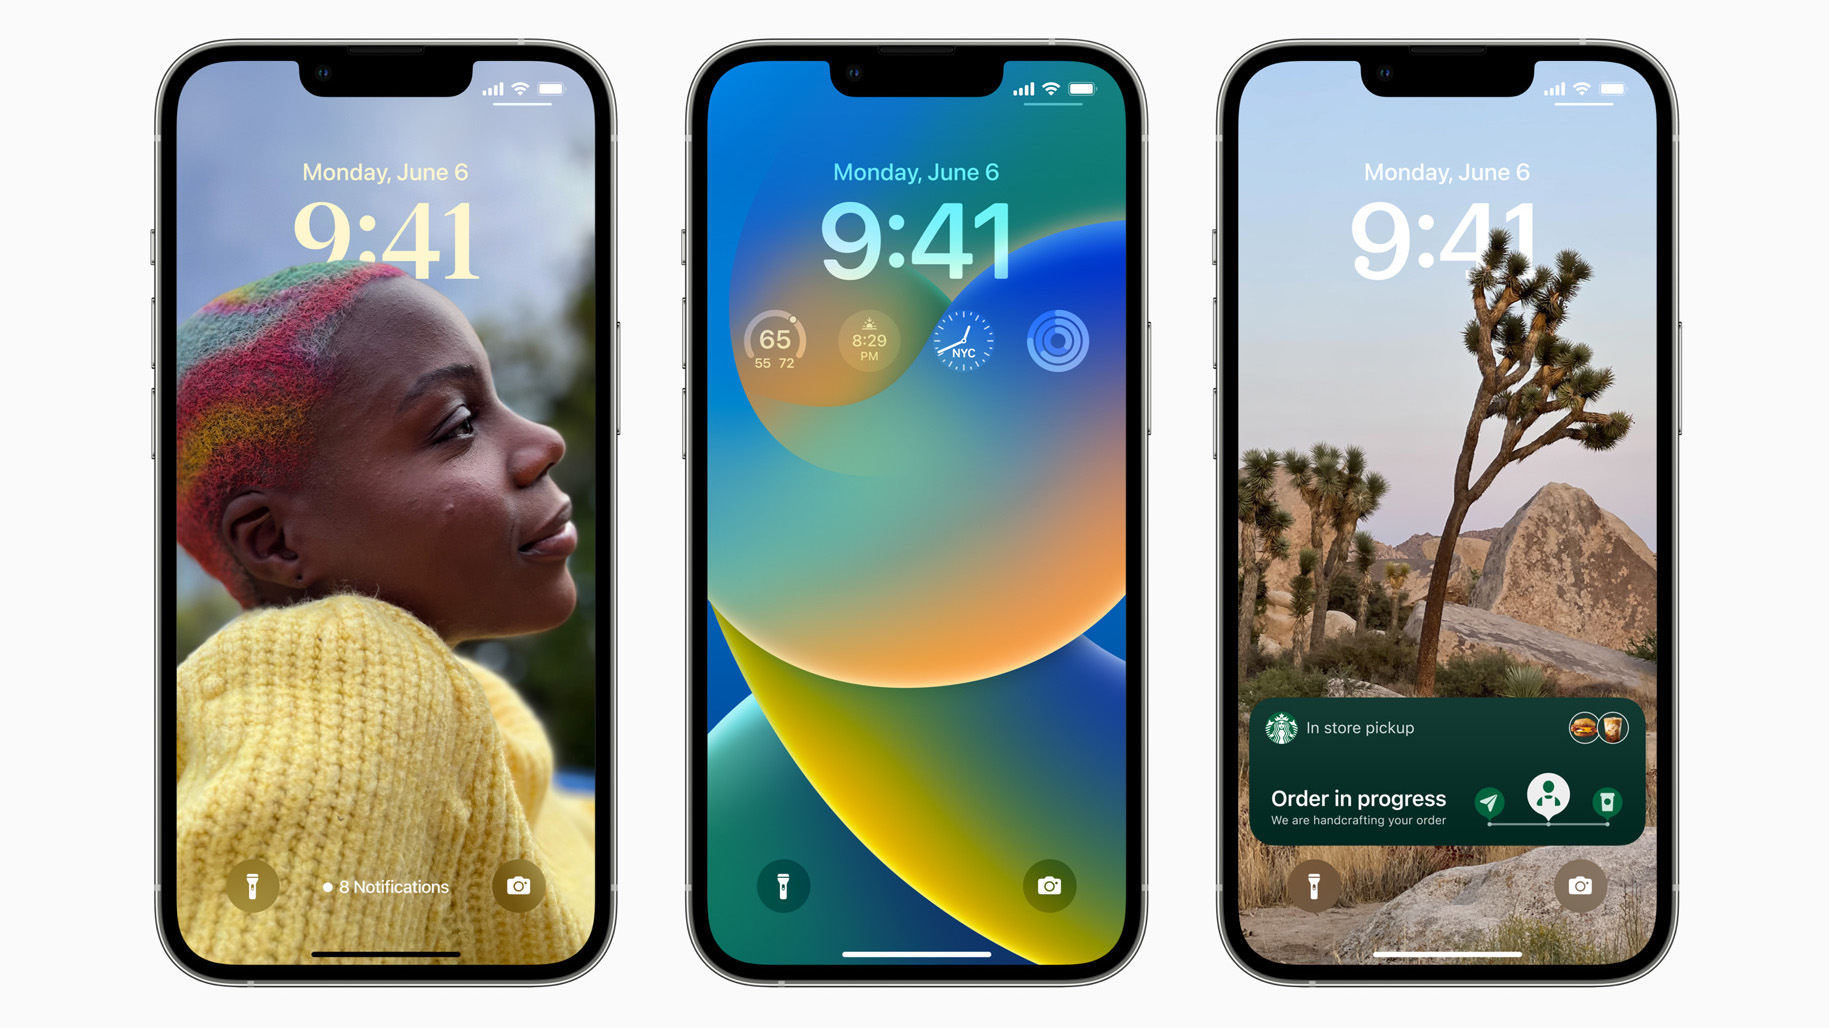 Apple's iOS 16 features new lock screen and ability to edit sent Messages